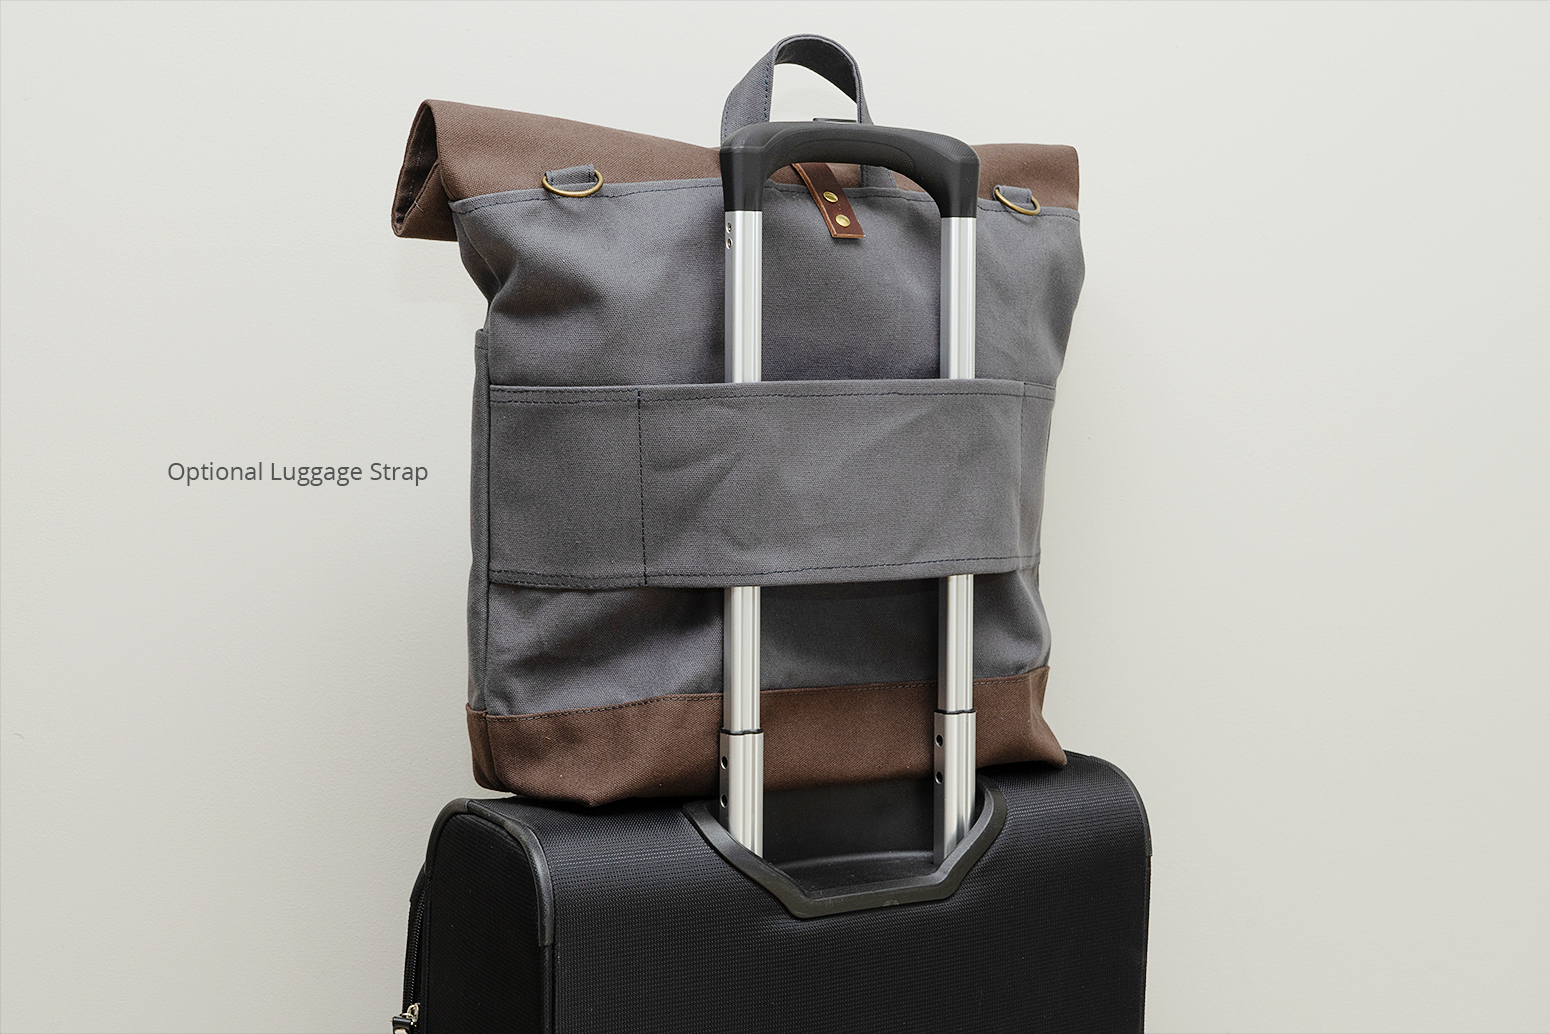 https://www.moderncoup.com/wp-content/uploads/2022/05/moderncoup-roll-top-bag-optional-luggage-strap_1055x1034.jpg